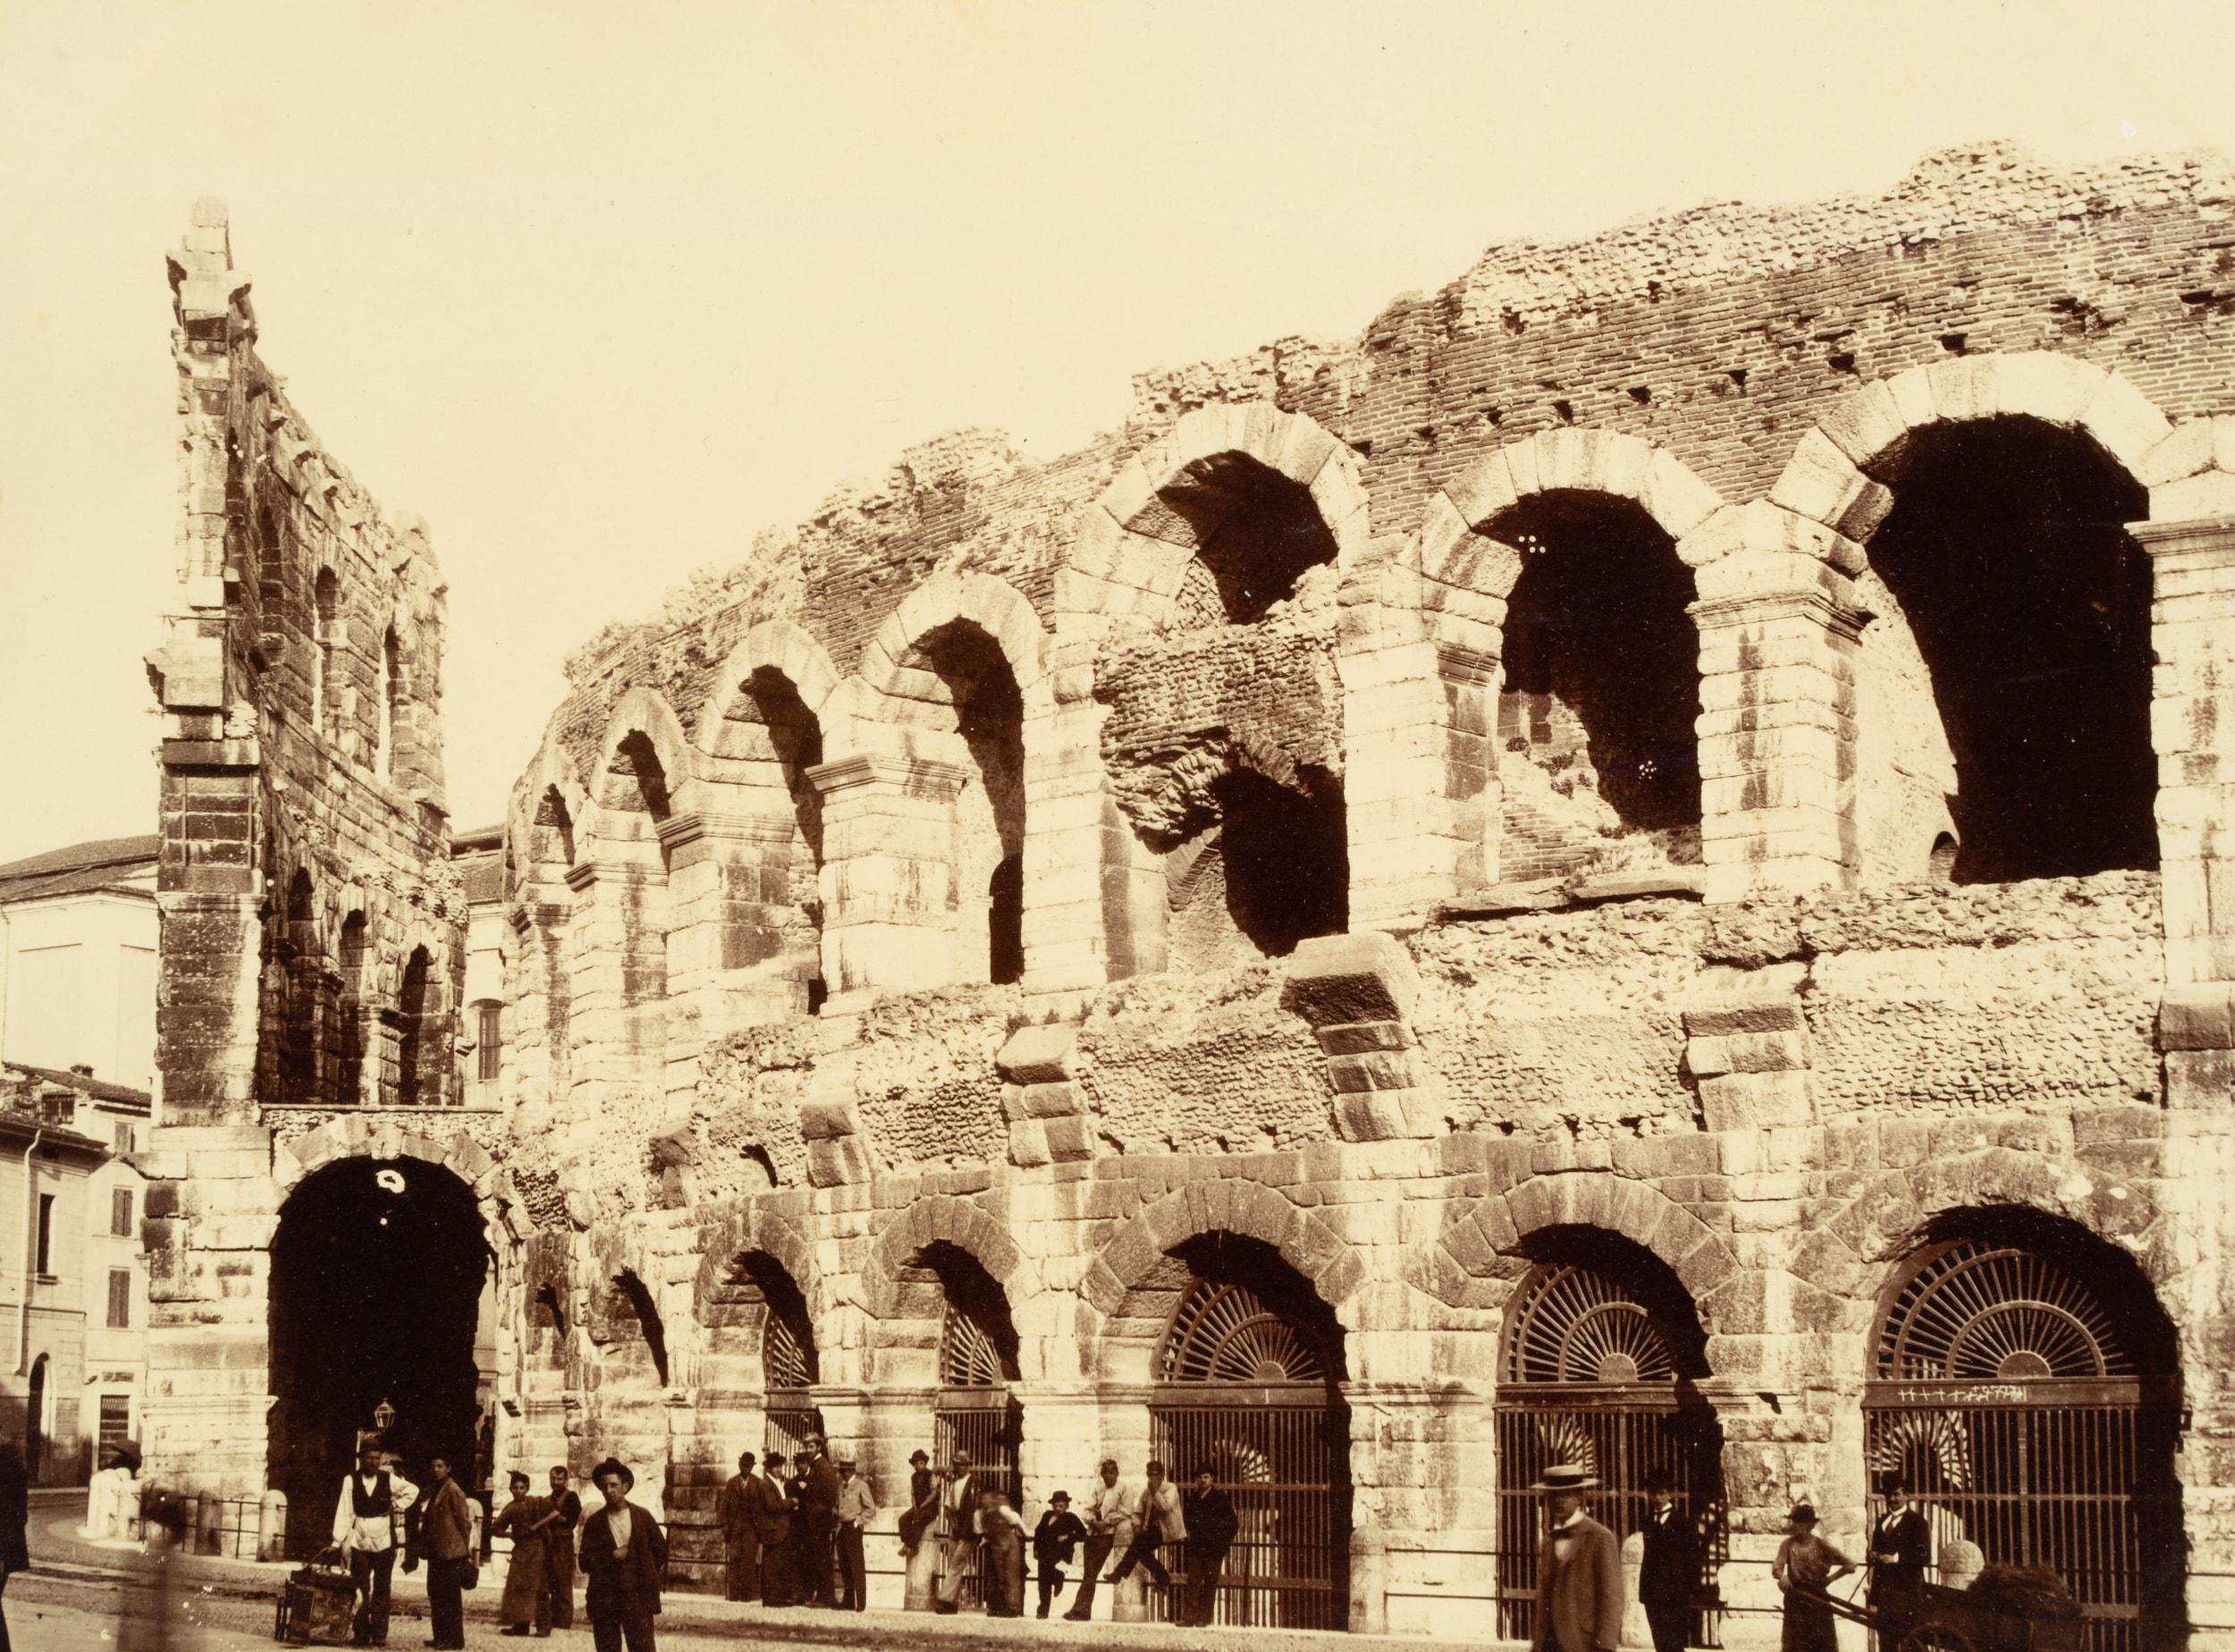 Unknown Landscape Photograph - Walls of the Arena of Verona